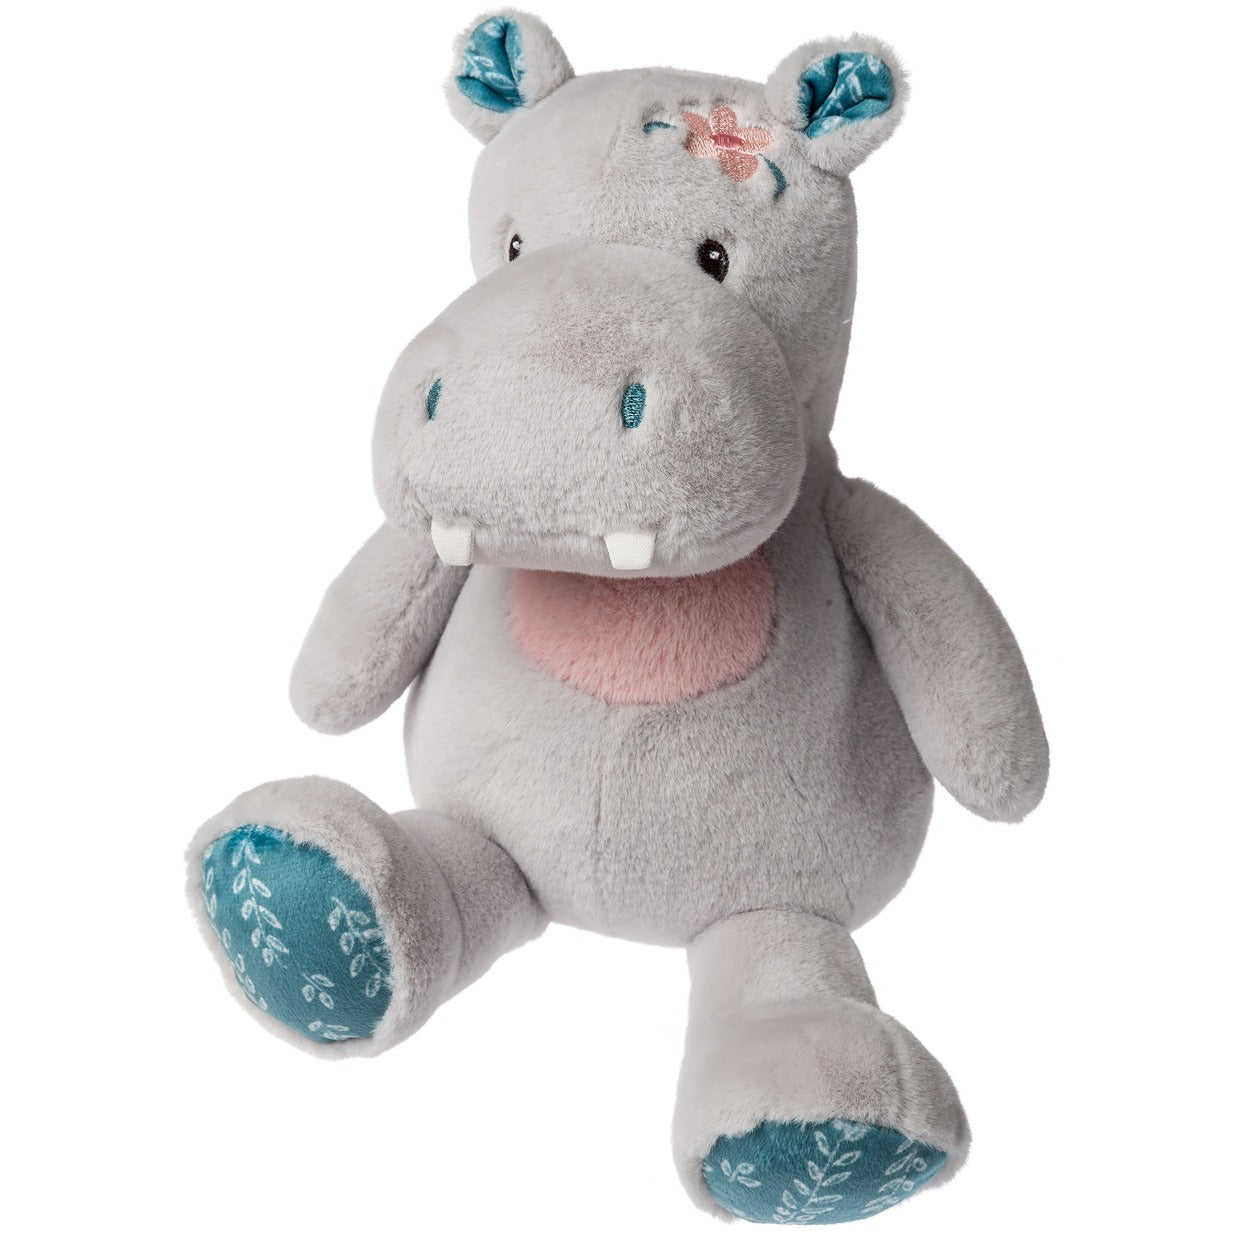 Mary Meyer Jewel Hippo Soft Baby Toy, Baby Shower Gifts, Plush Hippo Soft Toy